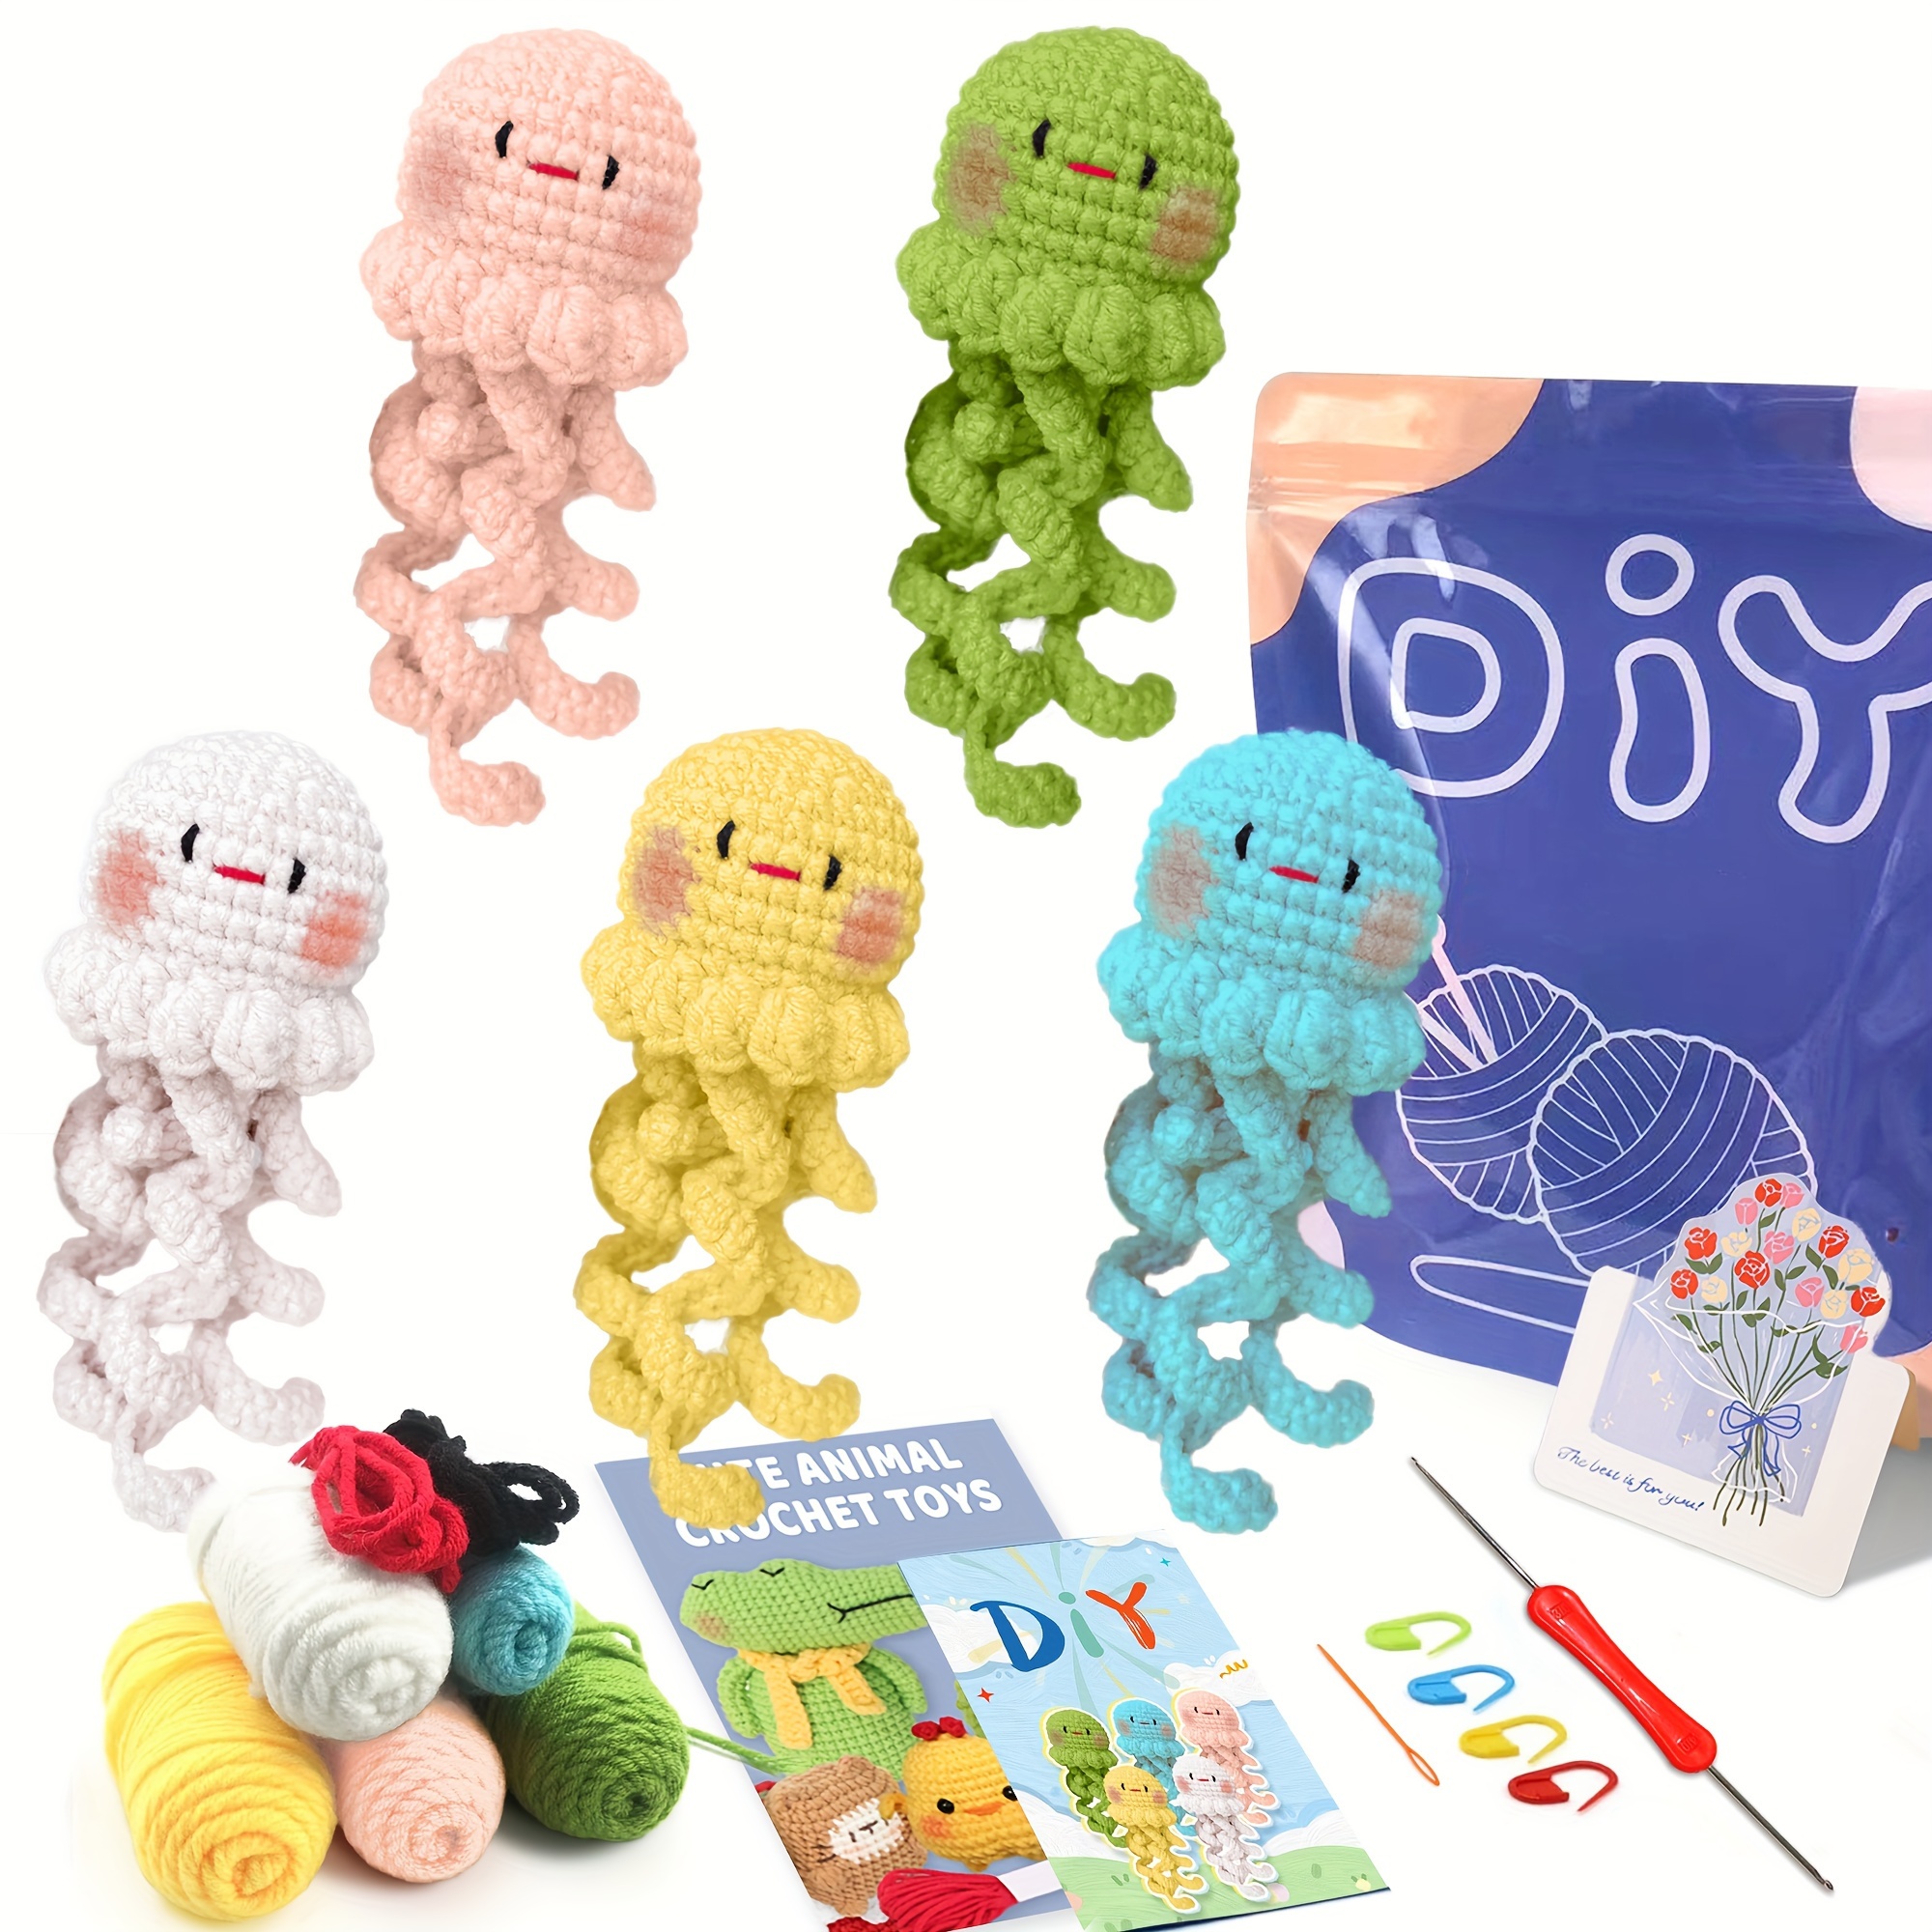 

5pcs, Colorful Jellyfish Crochet Knitting Entry-level Set, Suitable For Beginners And Enthusiasts Crochet Sets, Yarn, Seam Markers, Plastic Eyes And Instructions, Accessories In Random Colors